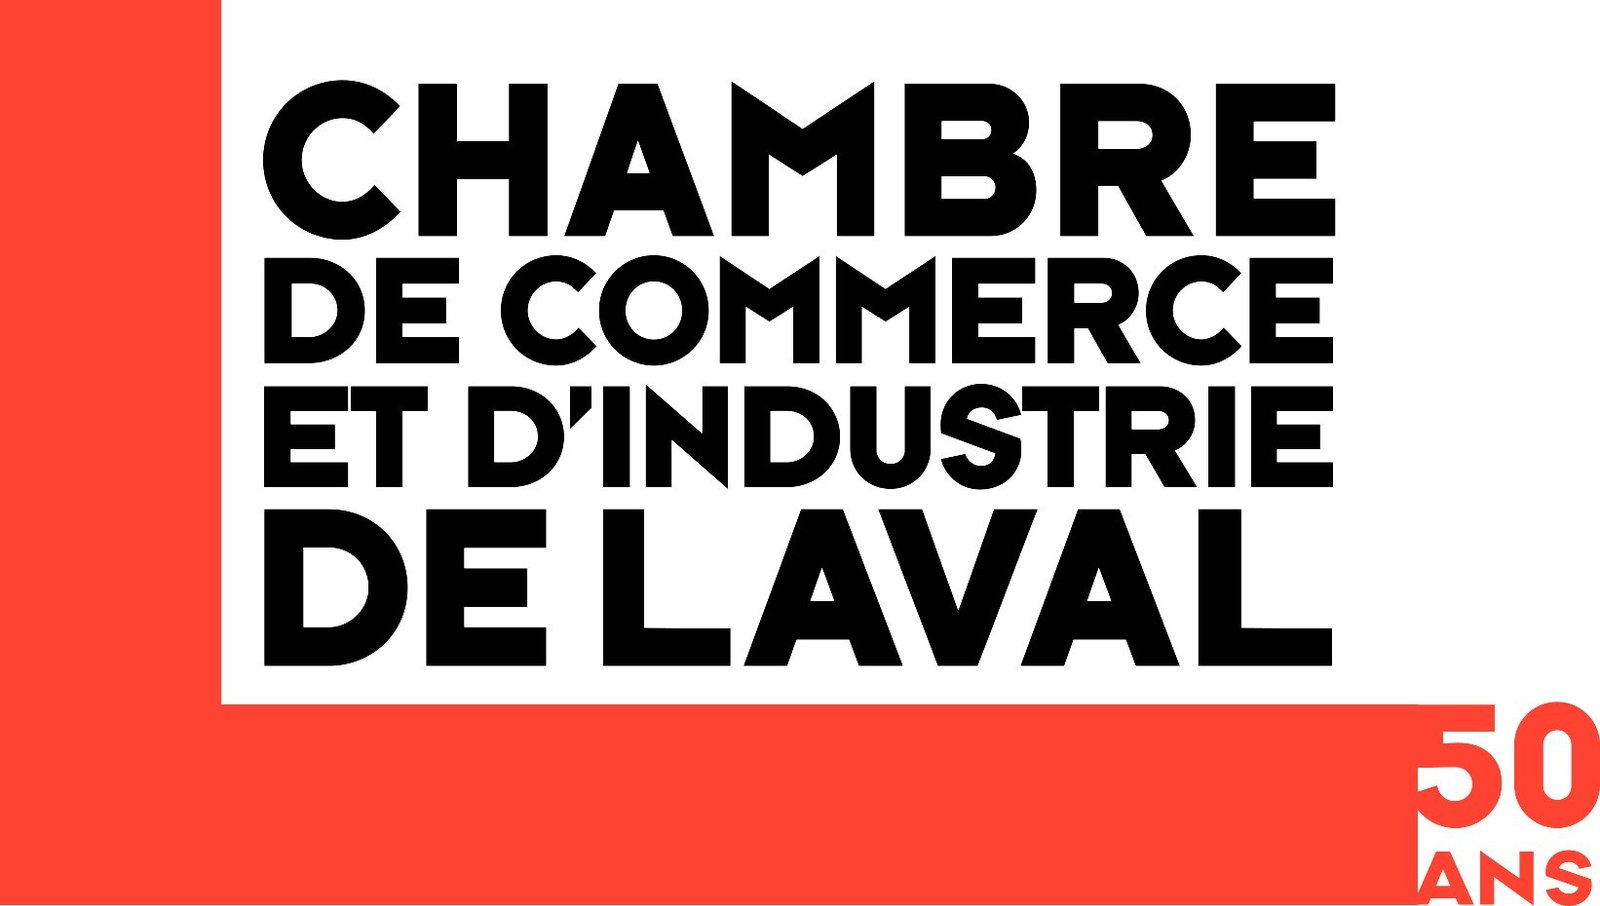 Laval well-placed to deal with COVID-19, says economic report